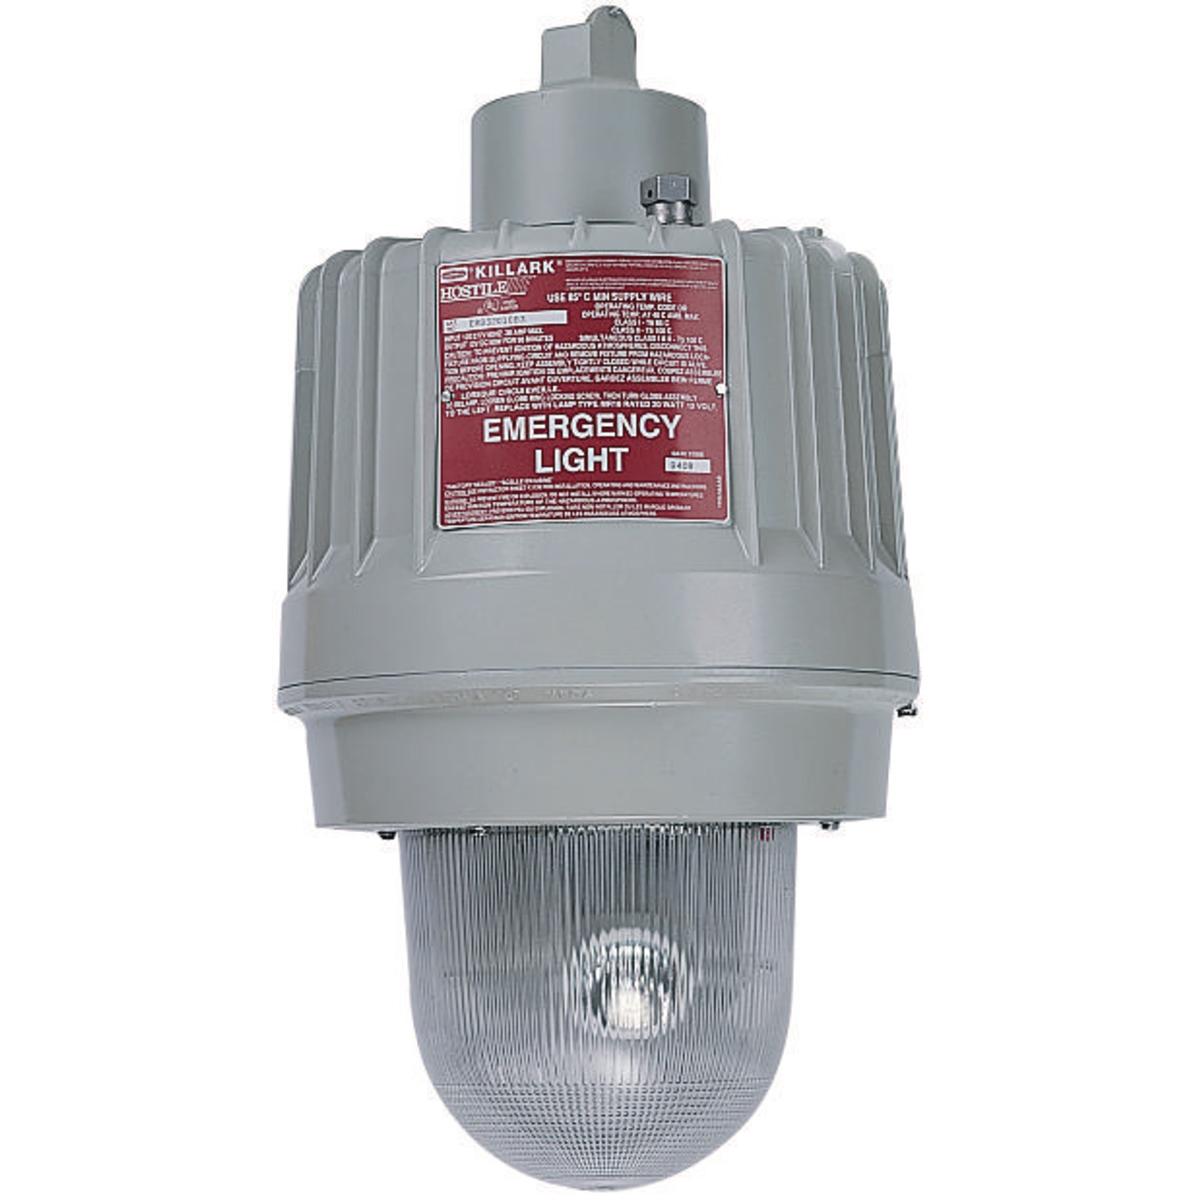 Hubbell EBB32010A2-TDR Emergency Hazardous Location Three Lamp 3/4" Pendant with 15 min Time Delay  ; Patented design three high intensity lamps can be independently adjusted to provide custom emergency lighting to a specific area ; Three 20 watt MR16 lamps included ; Pendant, 